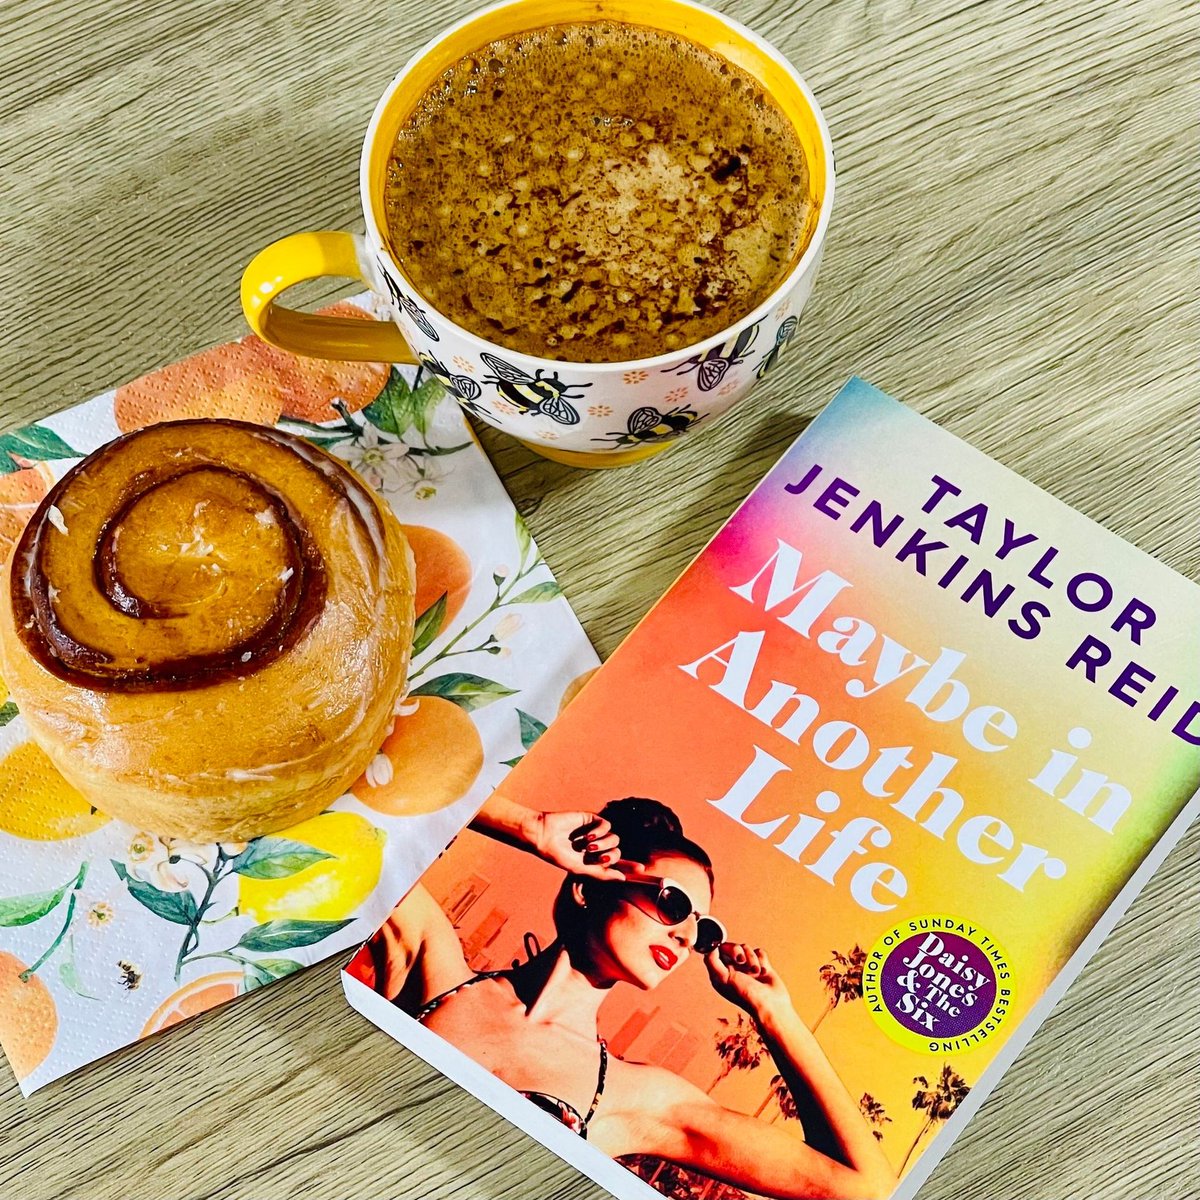 If you're in the GLY #BookClub you'll know that there was a LOT of chatter about #CinnamonBuns thanks to Taylor Jenkins Reid's book - Maybe in Another Life. Why does food elicit such discussion? I still remember the biscuit discussion in a @wurdsmyth's book last year!